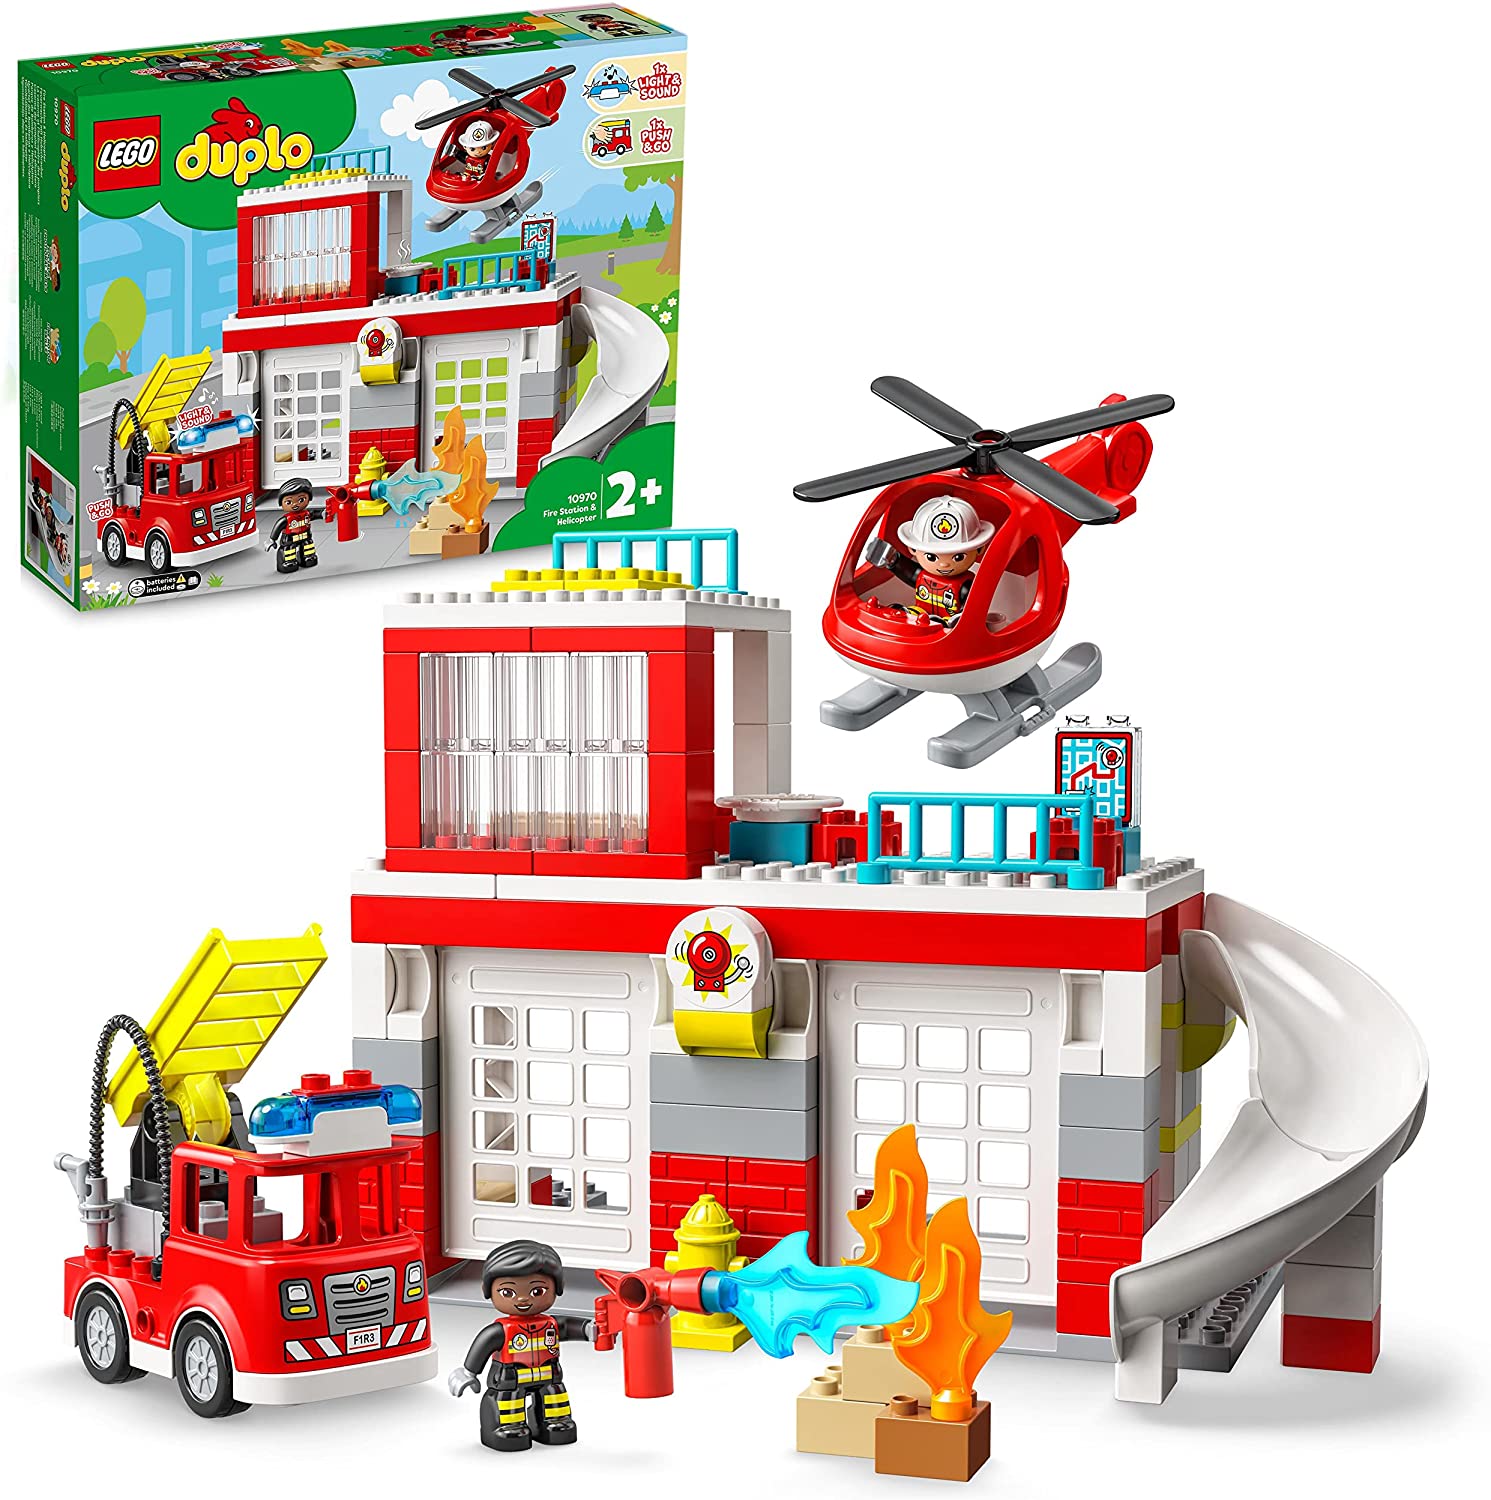 LEGO 10970 DUPLO Fire Station with Helicopter, Fire Engine Toy for Toddlers